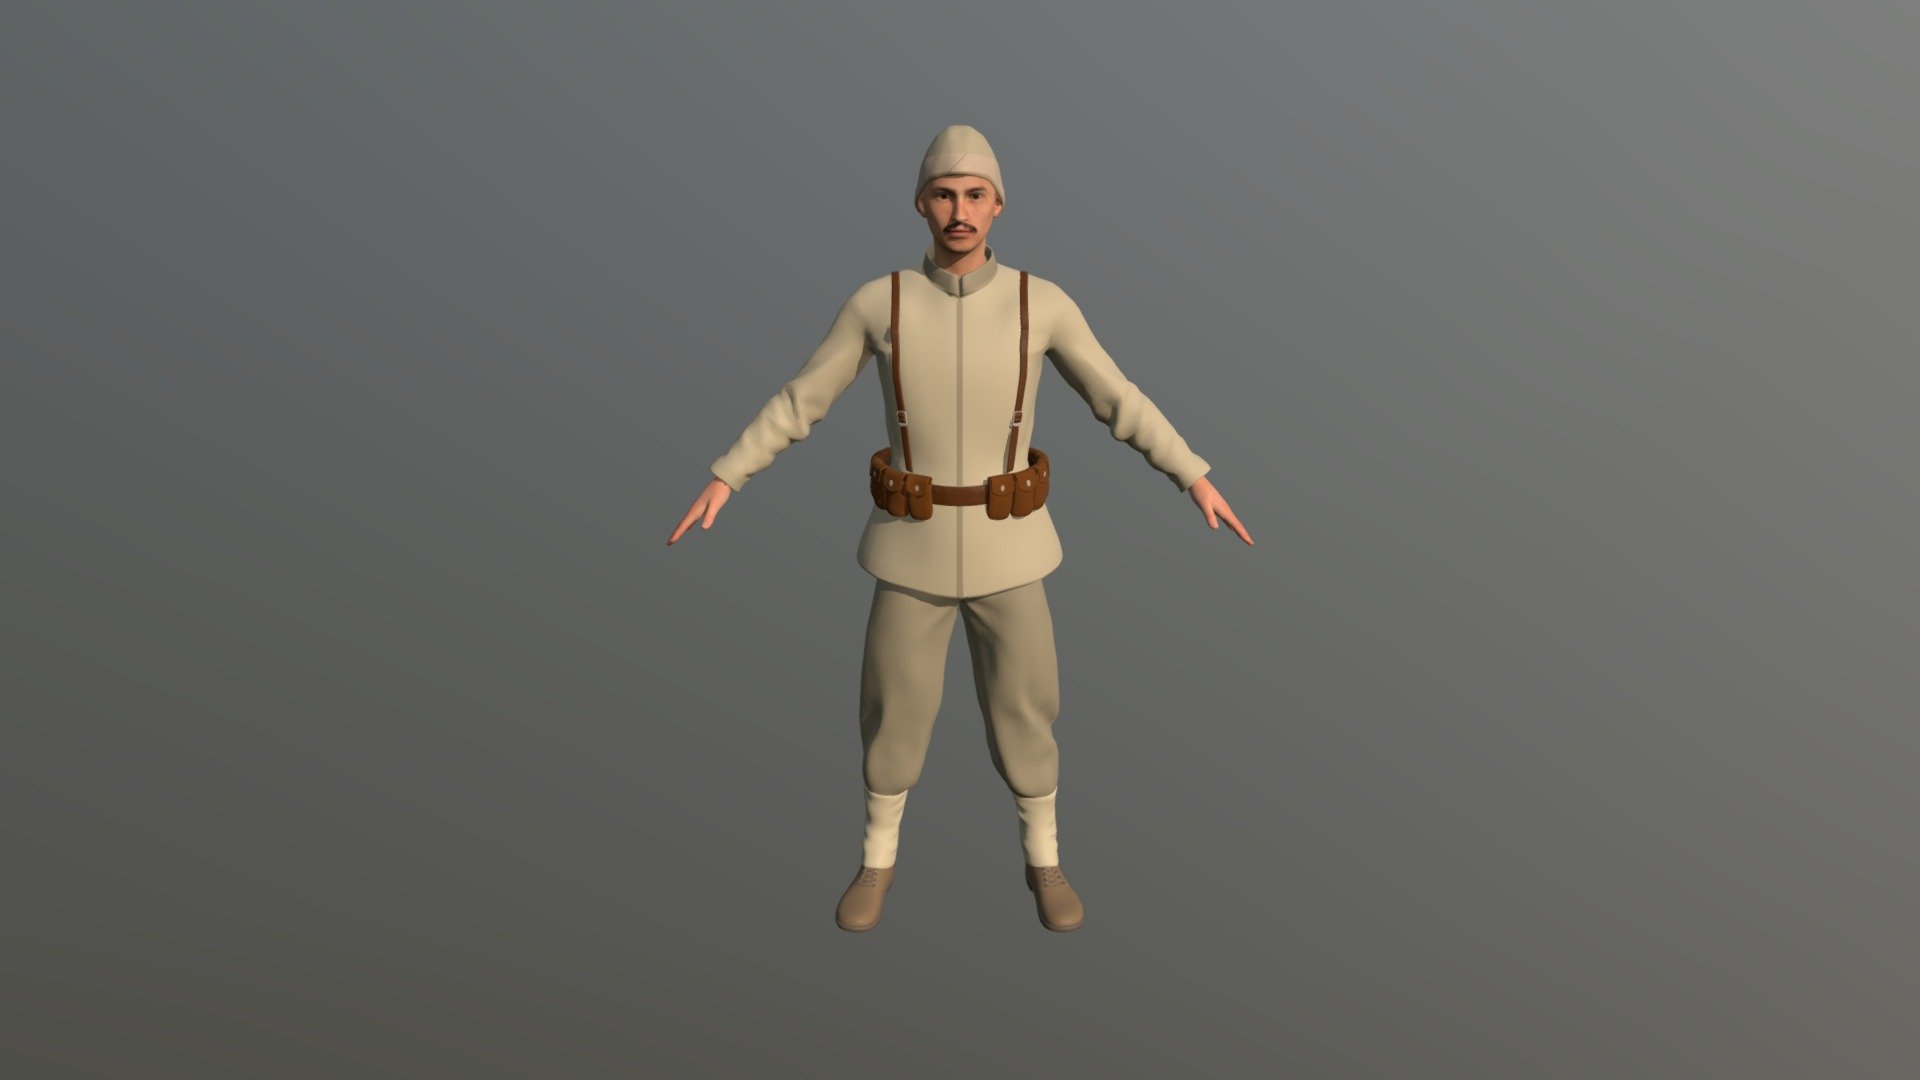 It has 40k polygons. Modeled with Cinema 4D. If you want to have the model, you can contact us.
Made by DijitalArtiz
instagram.com/dijitalartiz - Gallipoli Turkish Soldier 3D High Poly - 3D model by dijitalartiz 3d model